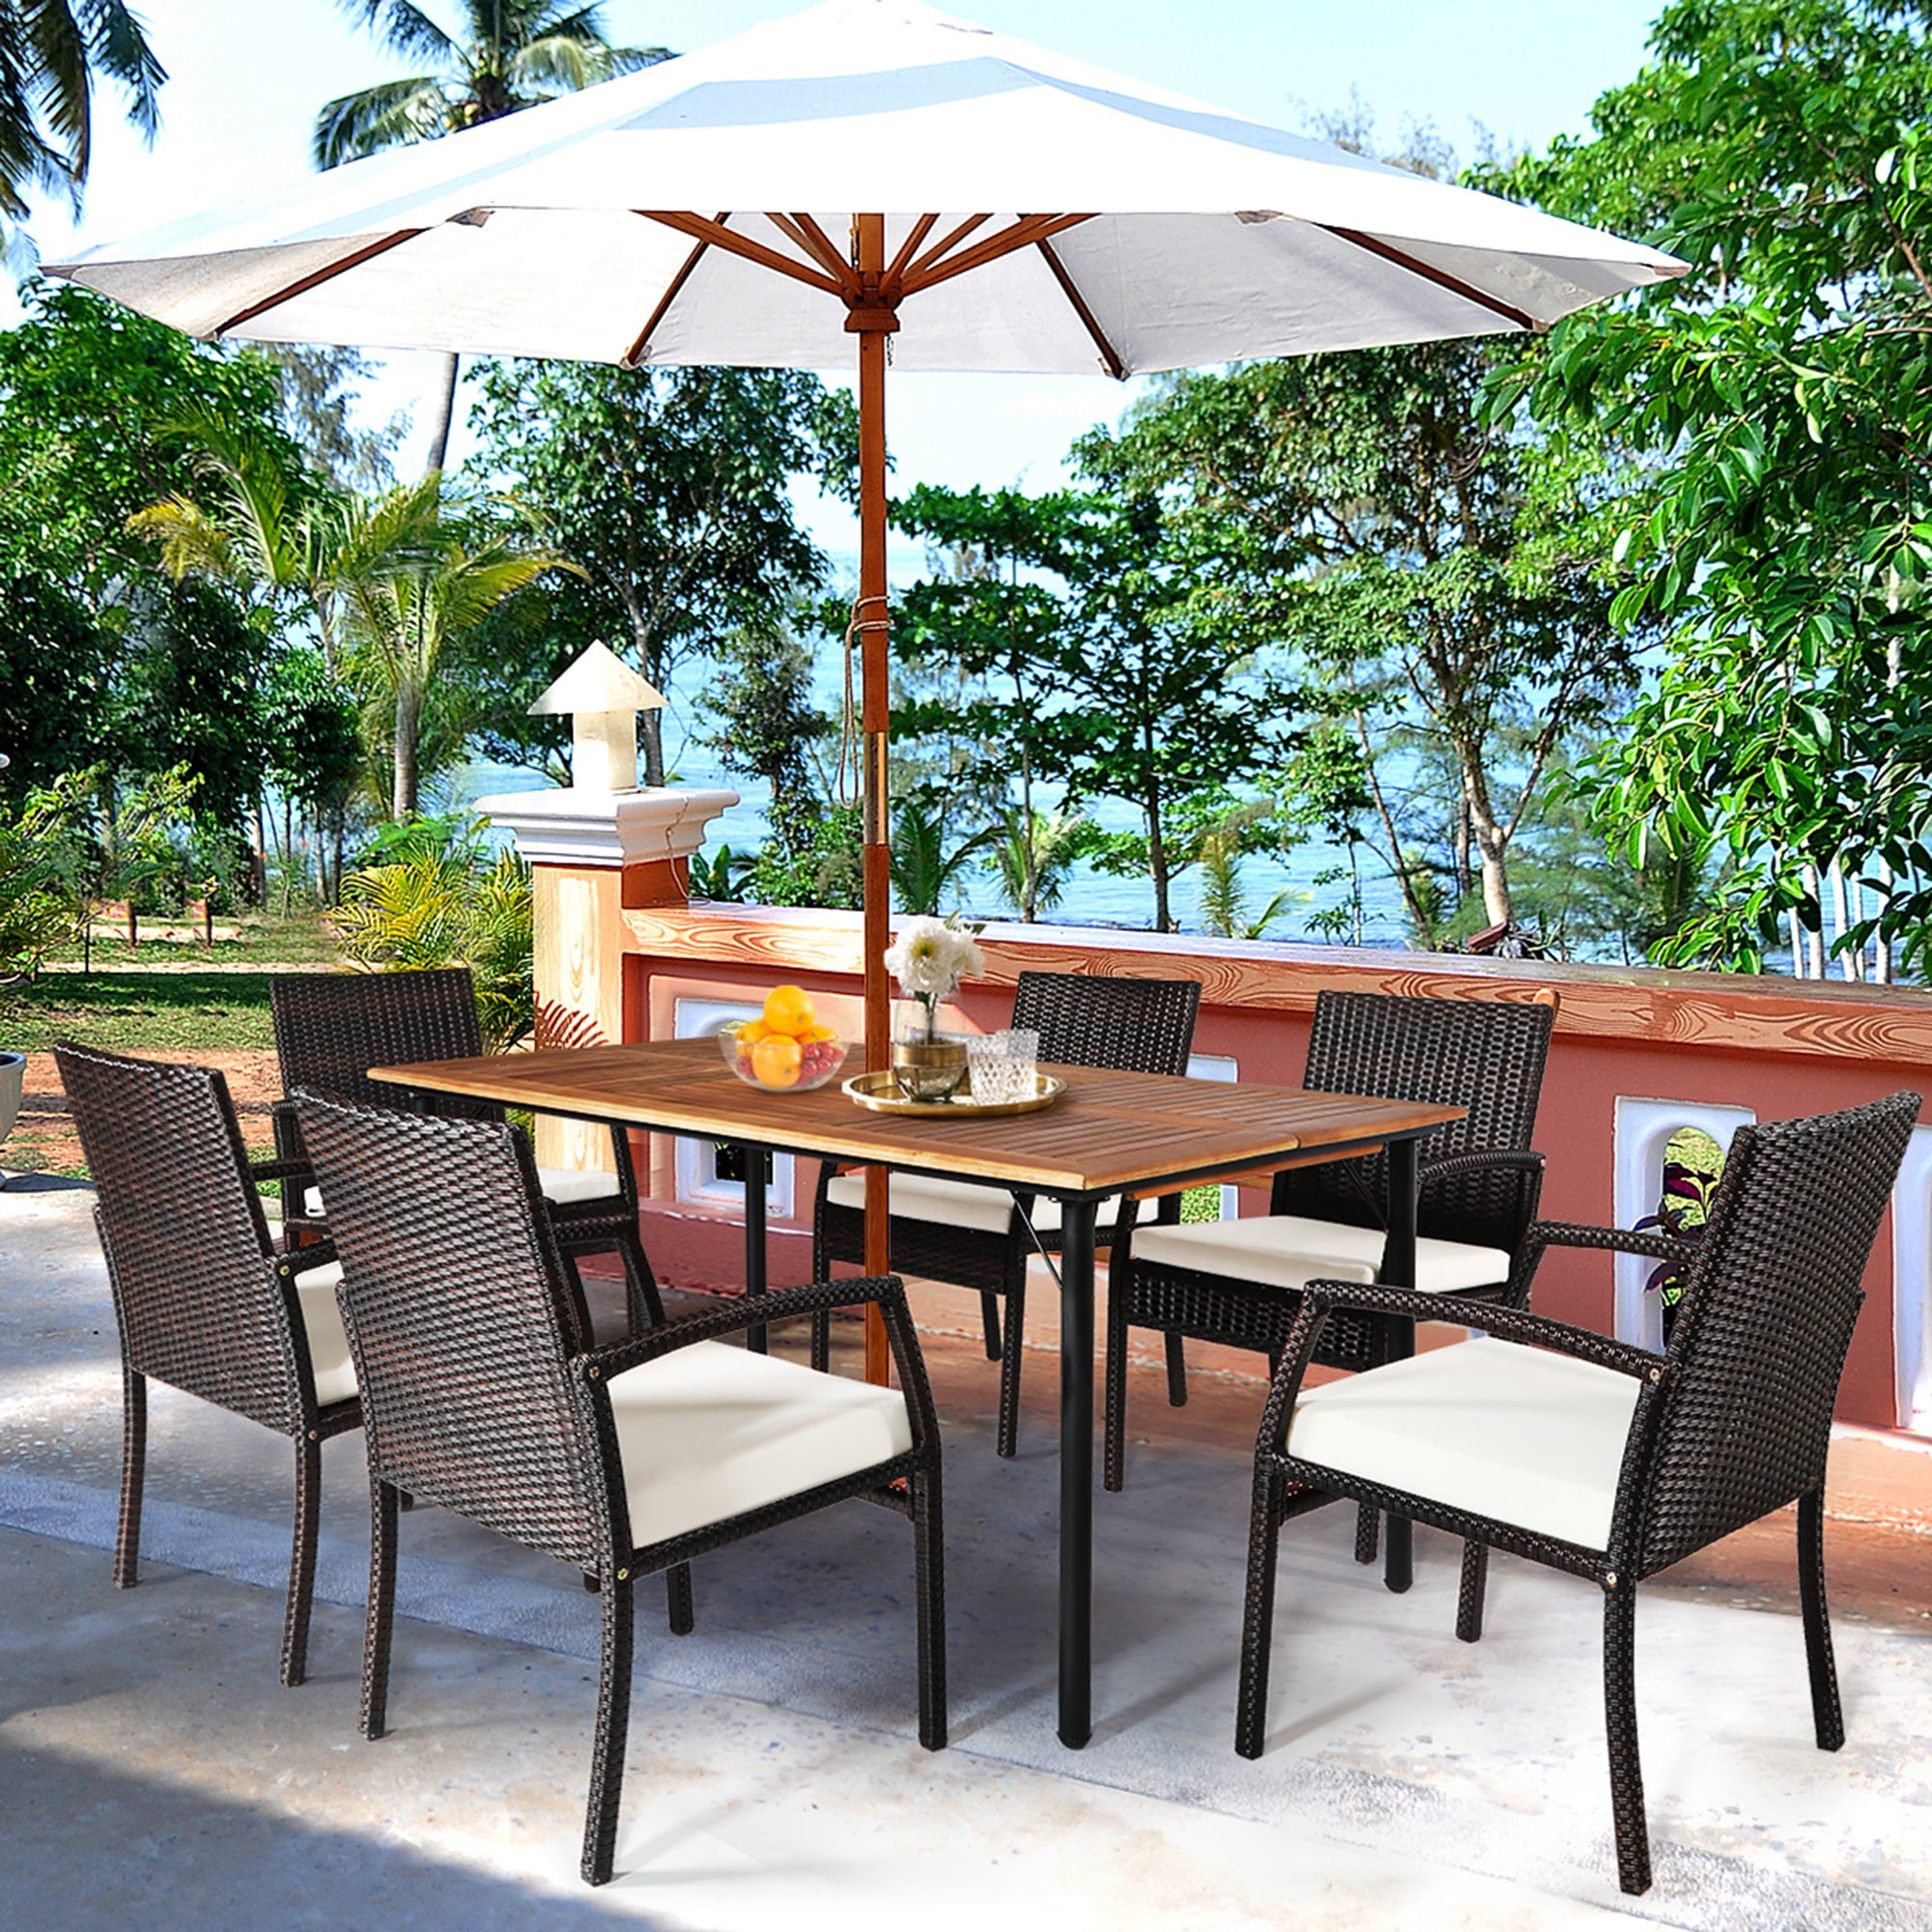 Gymax 7 Pieces Patio Dining Furniture, 7pcs Patio Rattan Cushioned Dining Set With Umbrella Hole Cover